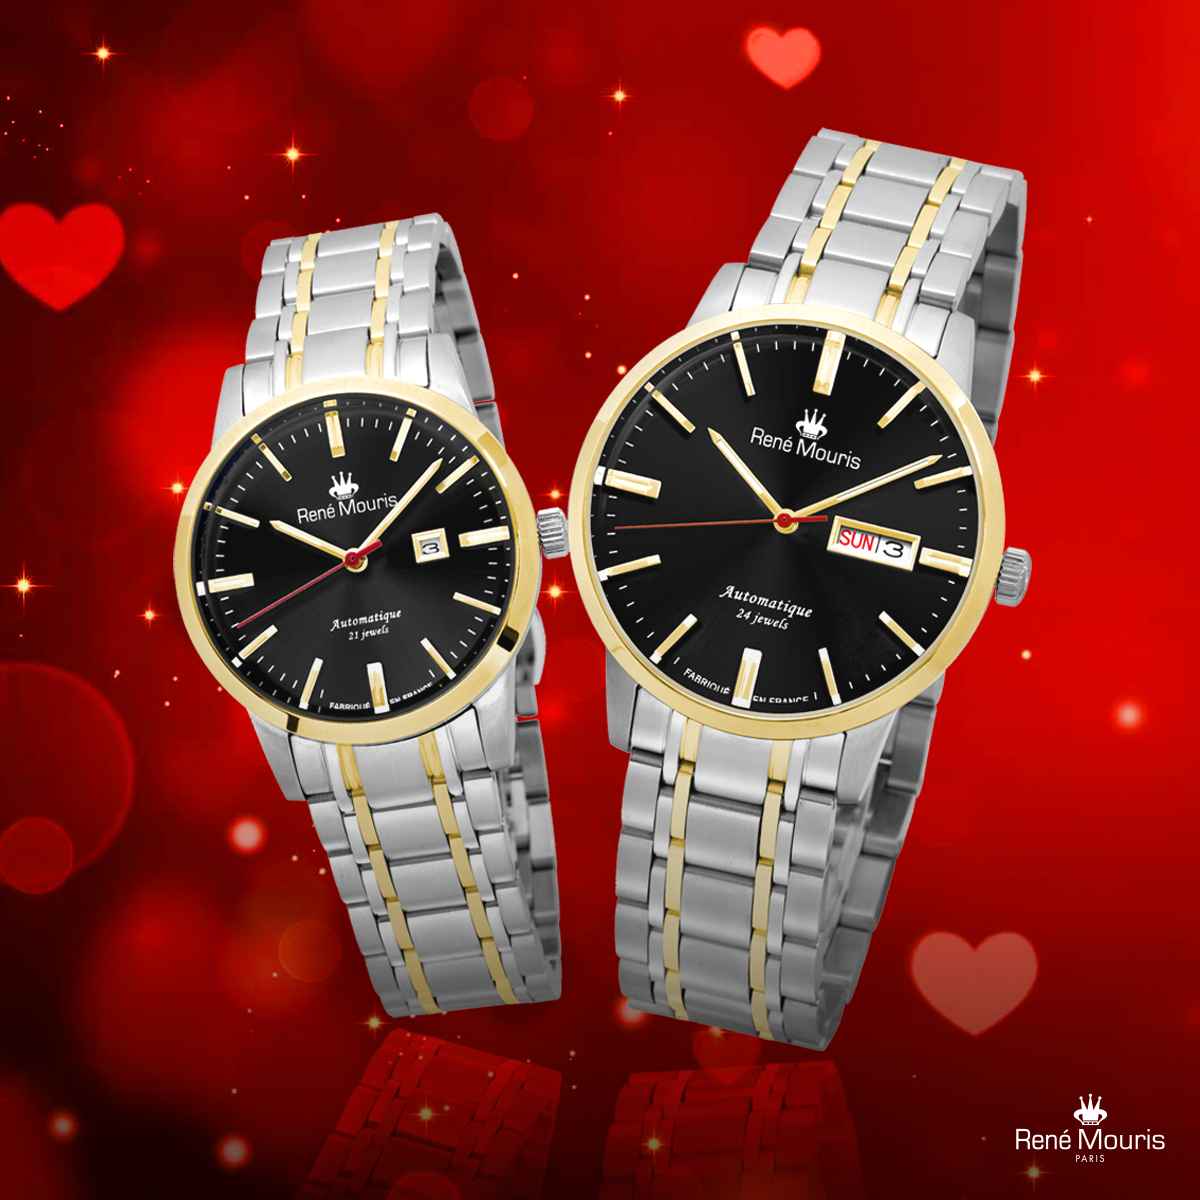 Valentine's Day Luxury Watches Gift Guide - Which One to Choose?